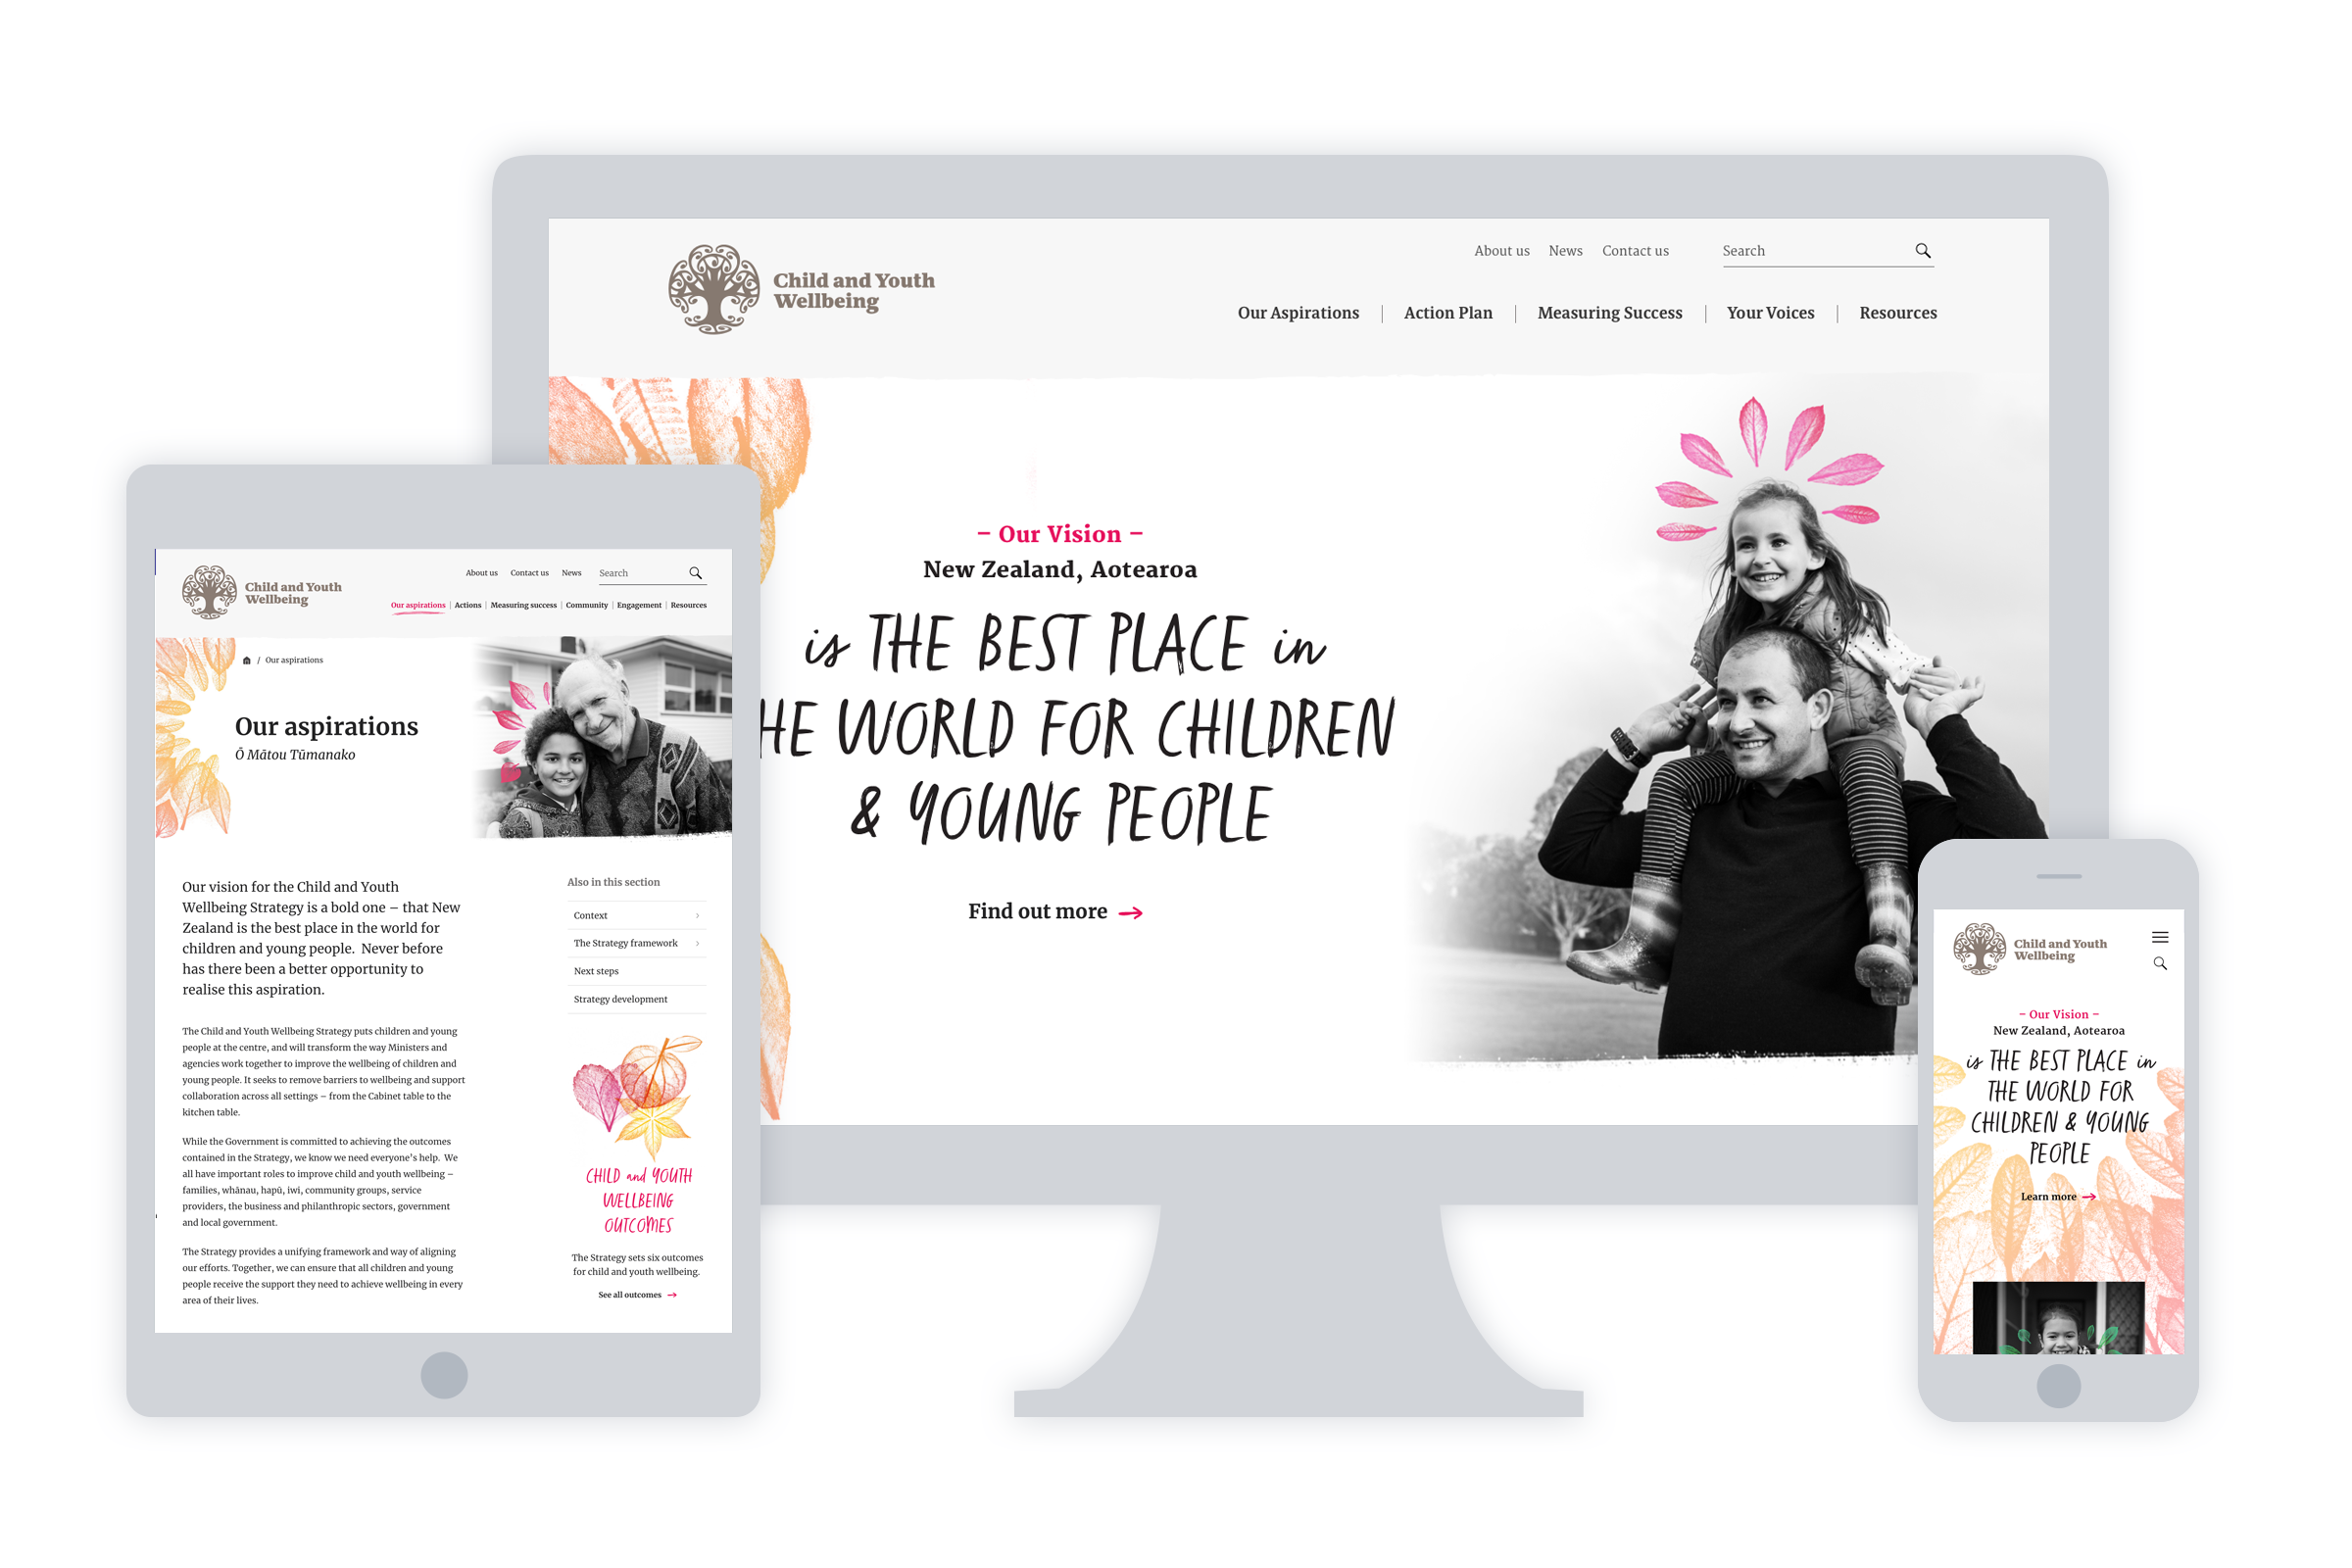 Screenshots of the Child and Youth Wellbeing site